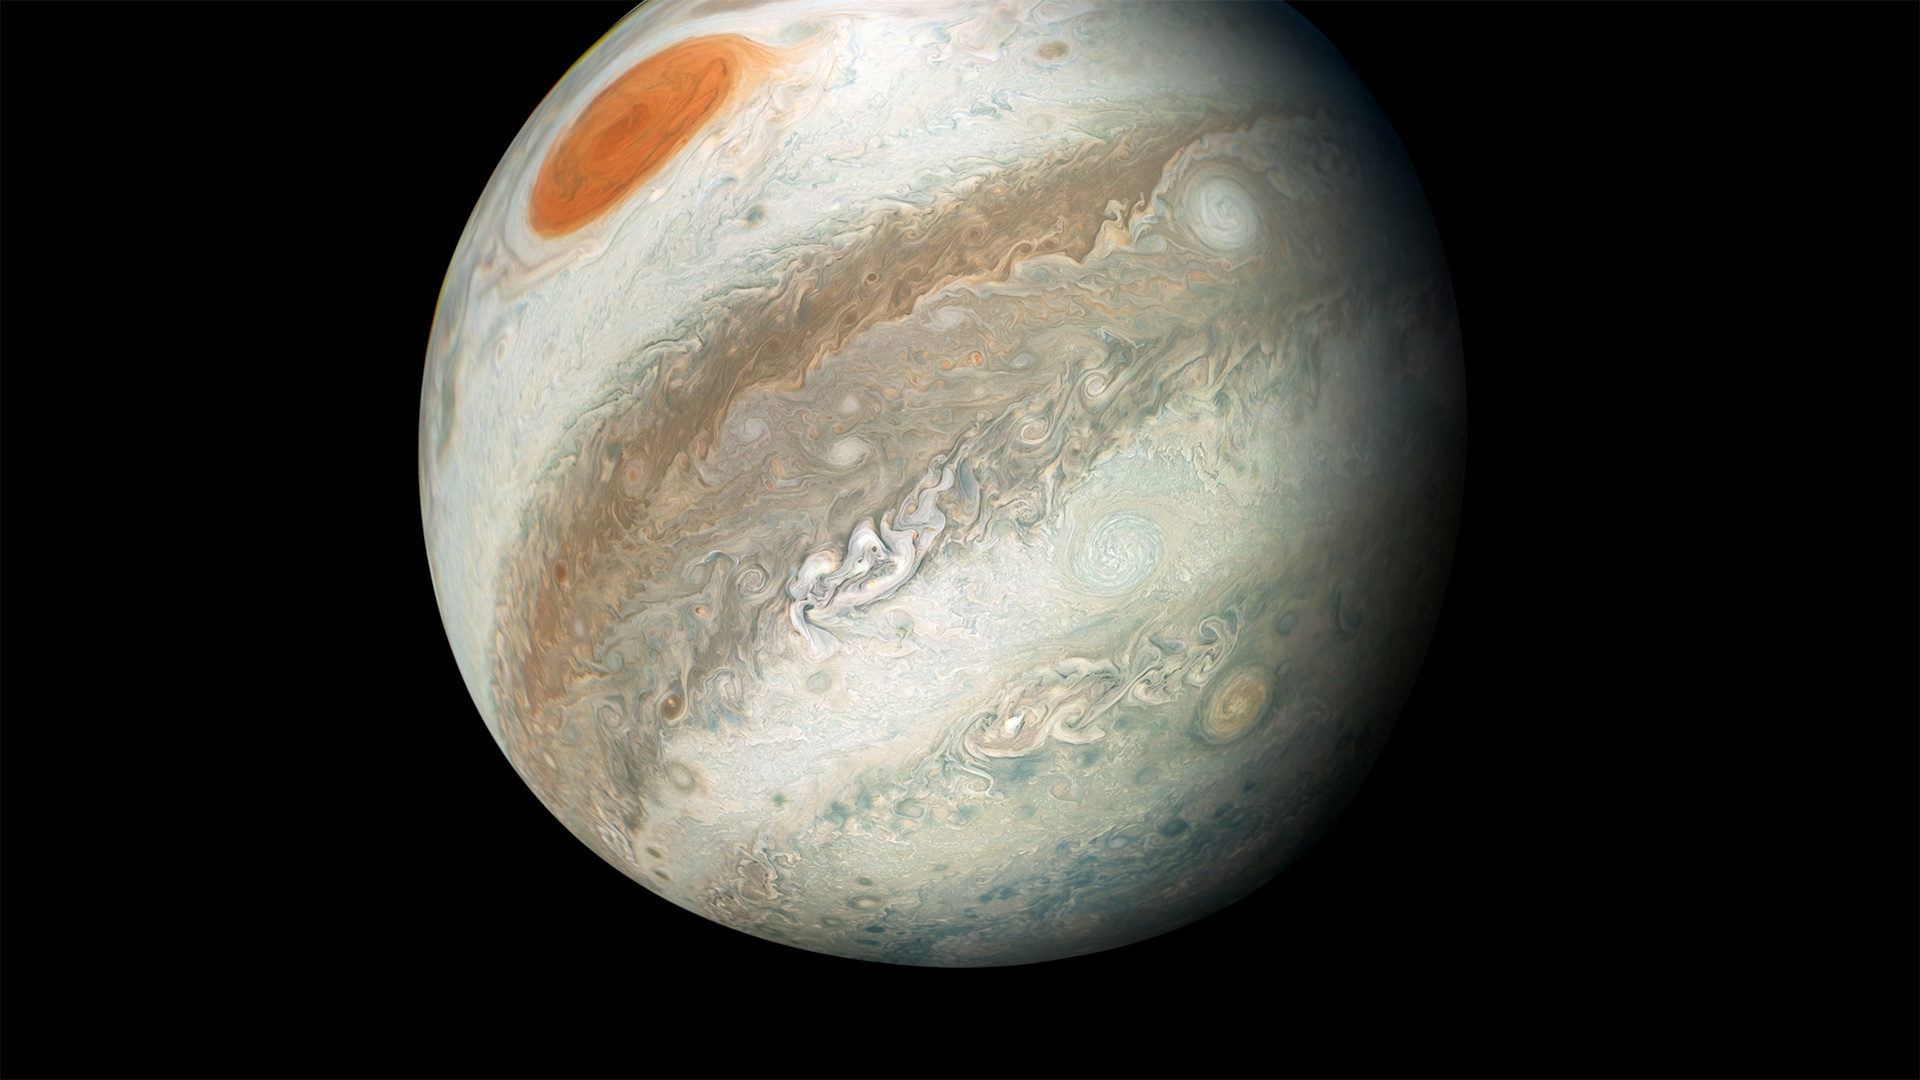 NASA's Juno spacecraft depicts the view of Jupiter, as the spacecraft performed a low flyby of Jupiter